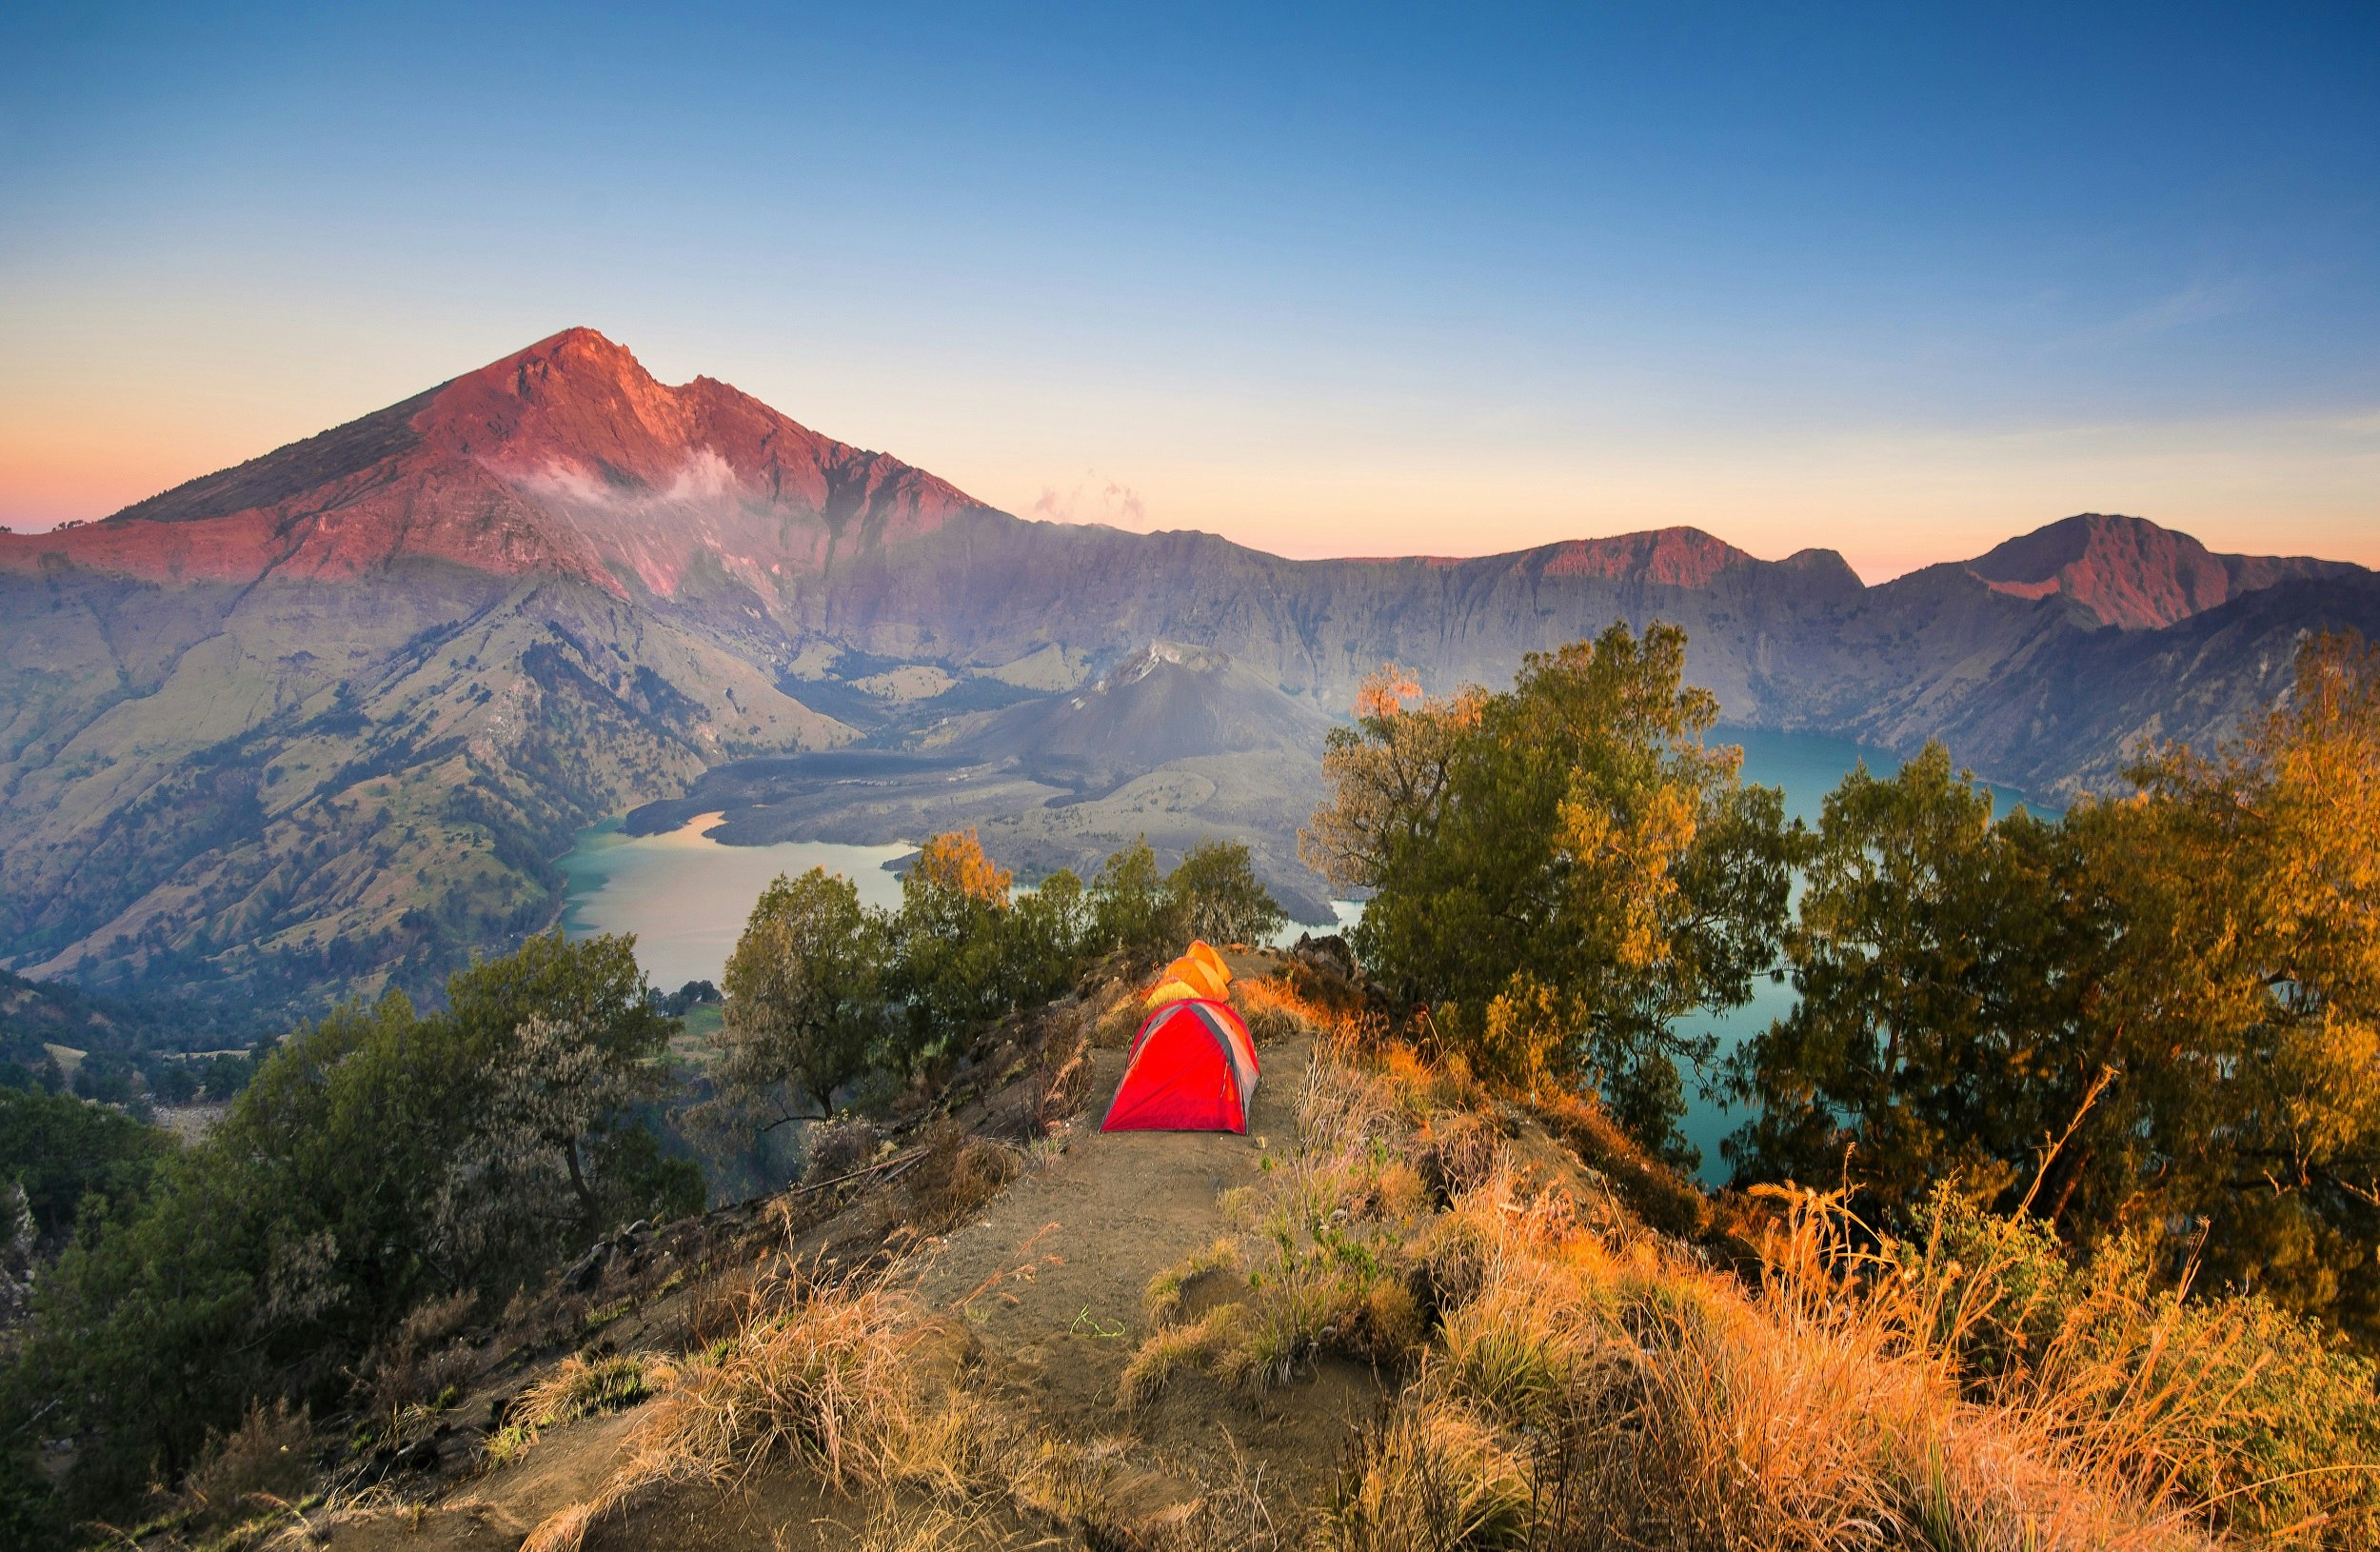 A red and an orange tent sit on a ridge above a lake. A tall peaked mountain is in the background